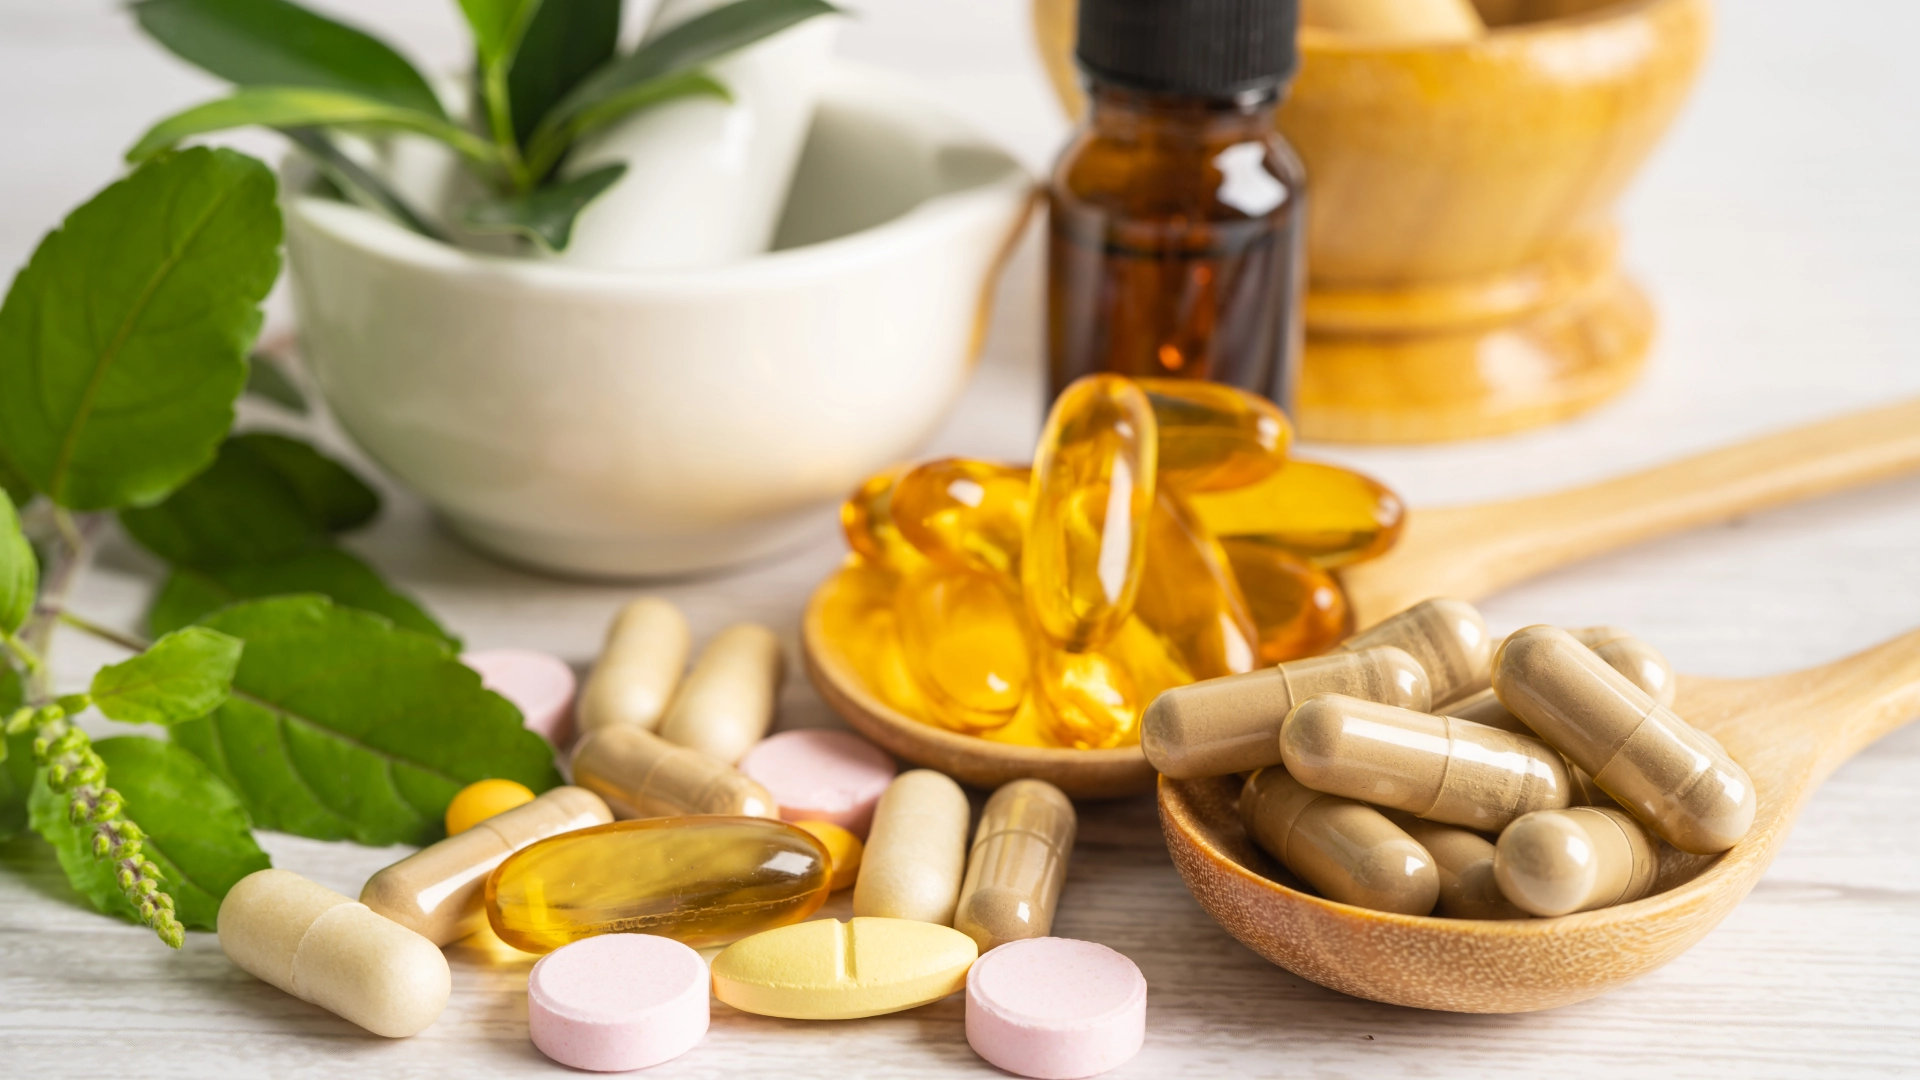 An array of anti-inflammatory nutritional supplements in capsules and tablet form